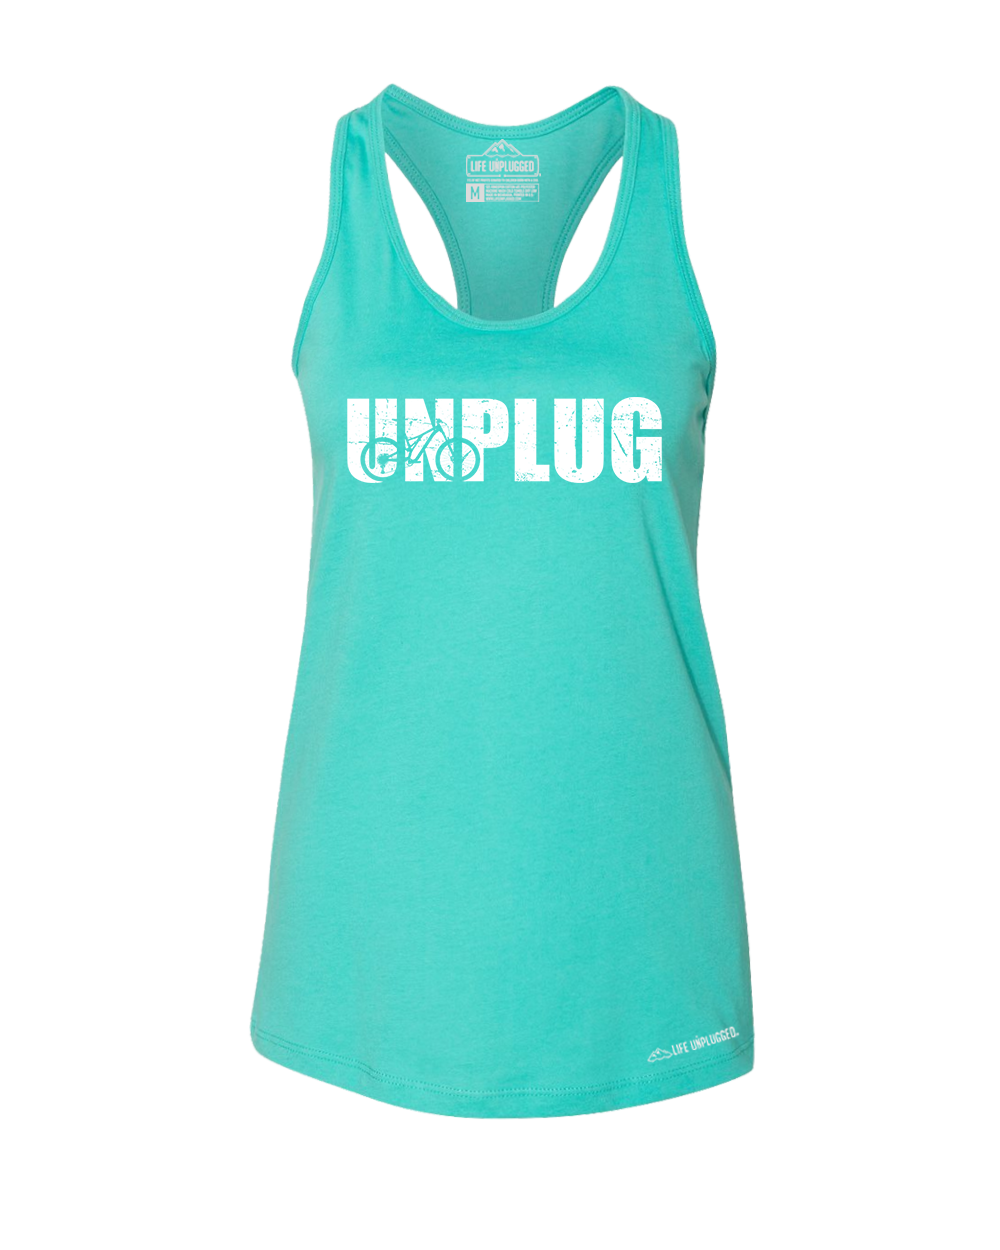 Unplug Mountain Bike Silhouette Premium Women's Relaxed Fit Racerback Tank Top - Life Unplugged